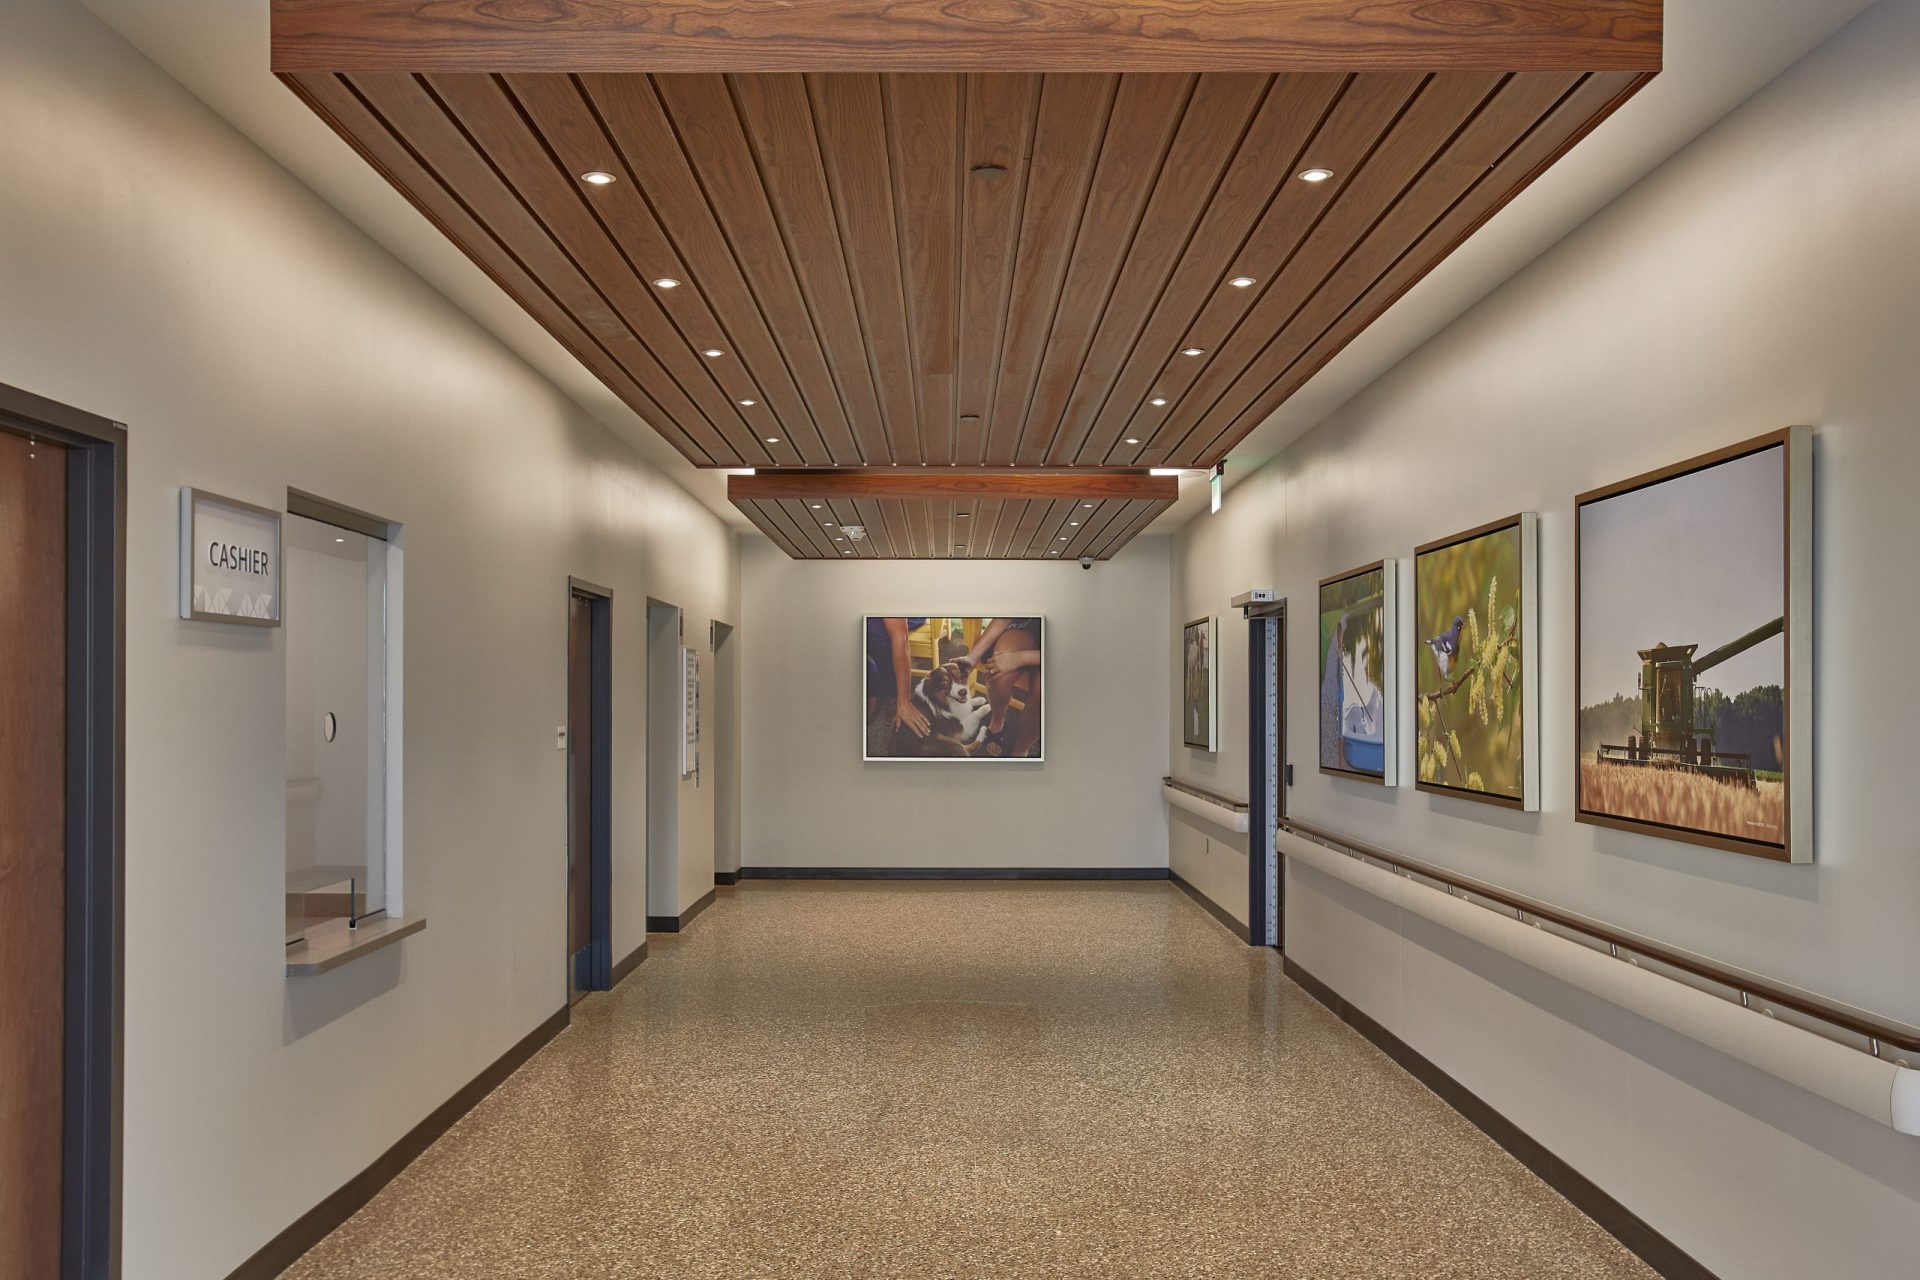 Design considerations for behavioral health patients